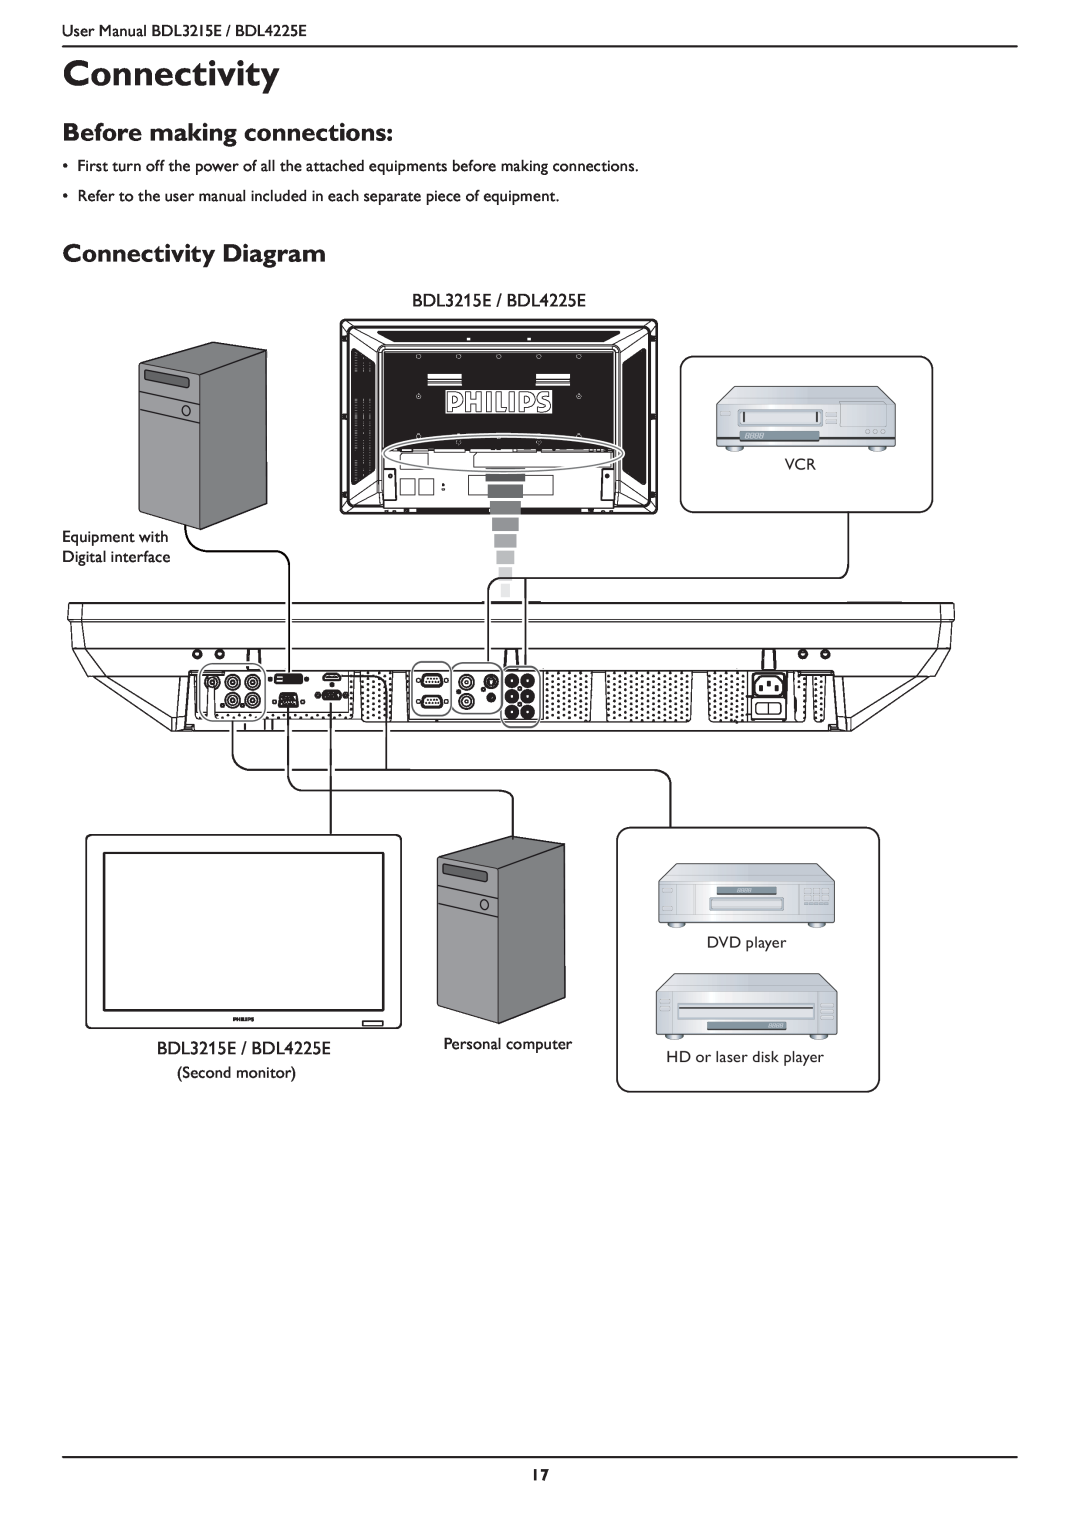 Philips user manual Before making connections, Connectivity Diagram, BDL3215E / BDL4225E 